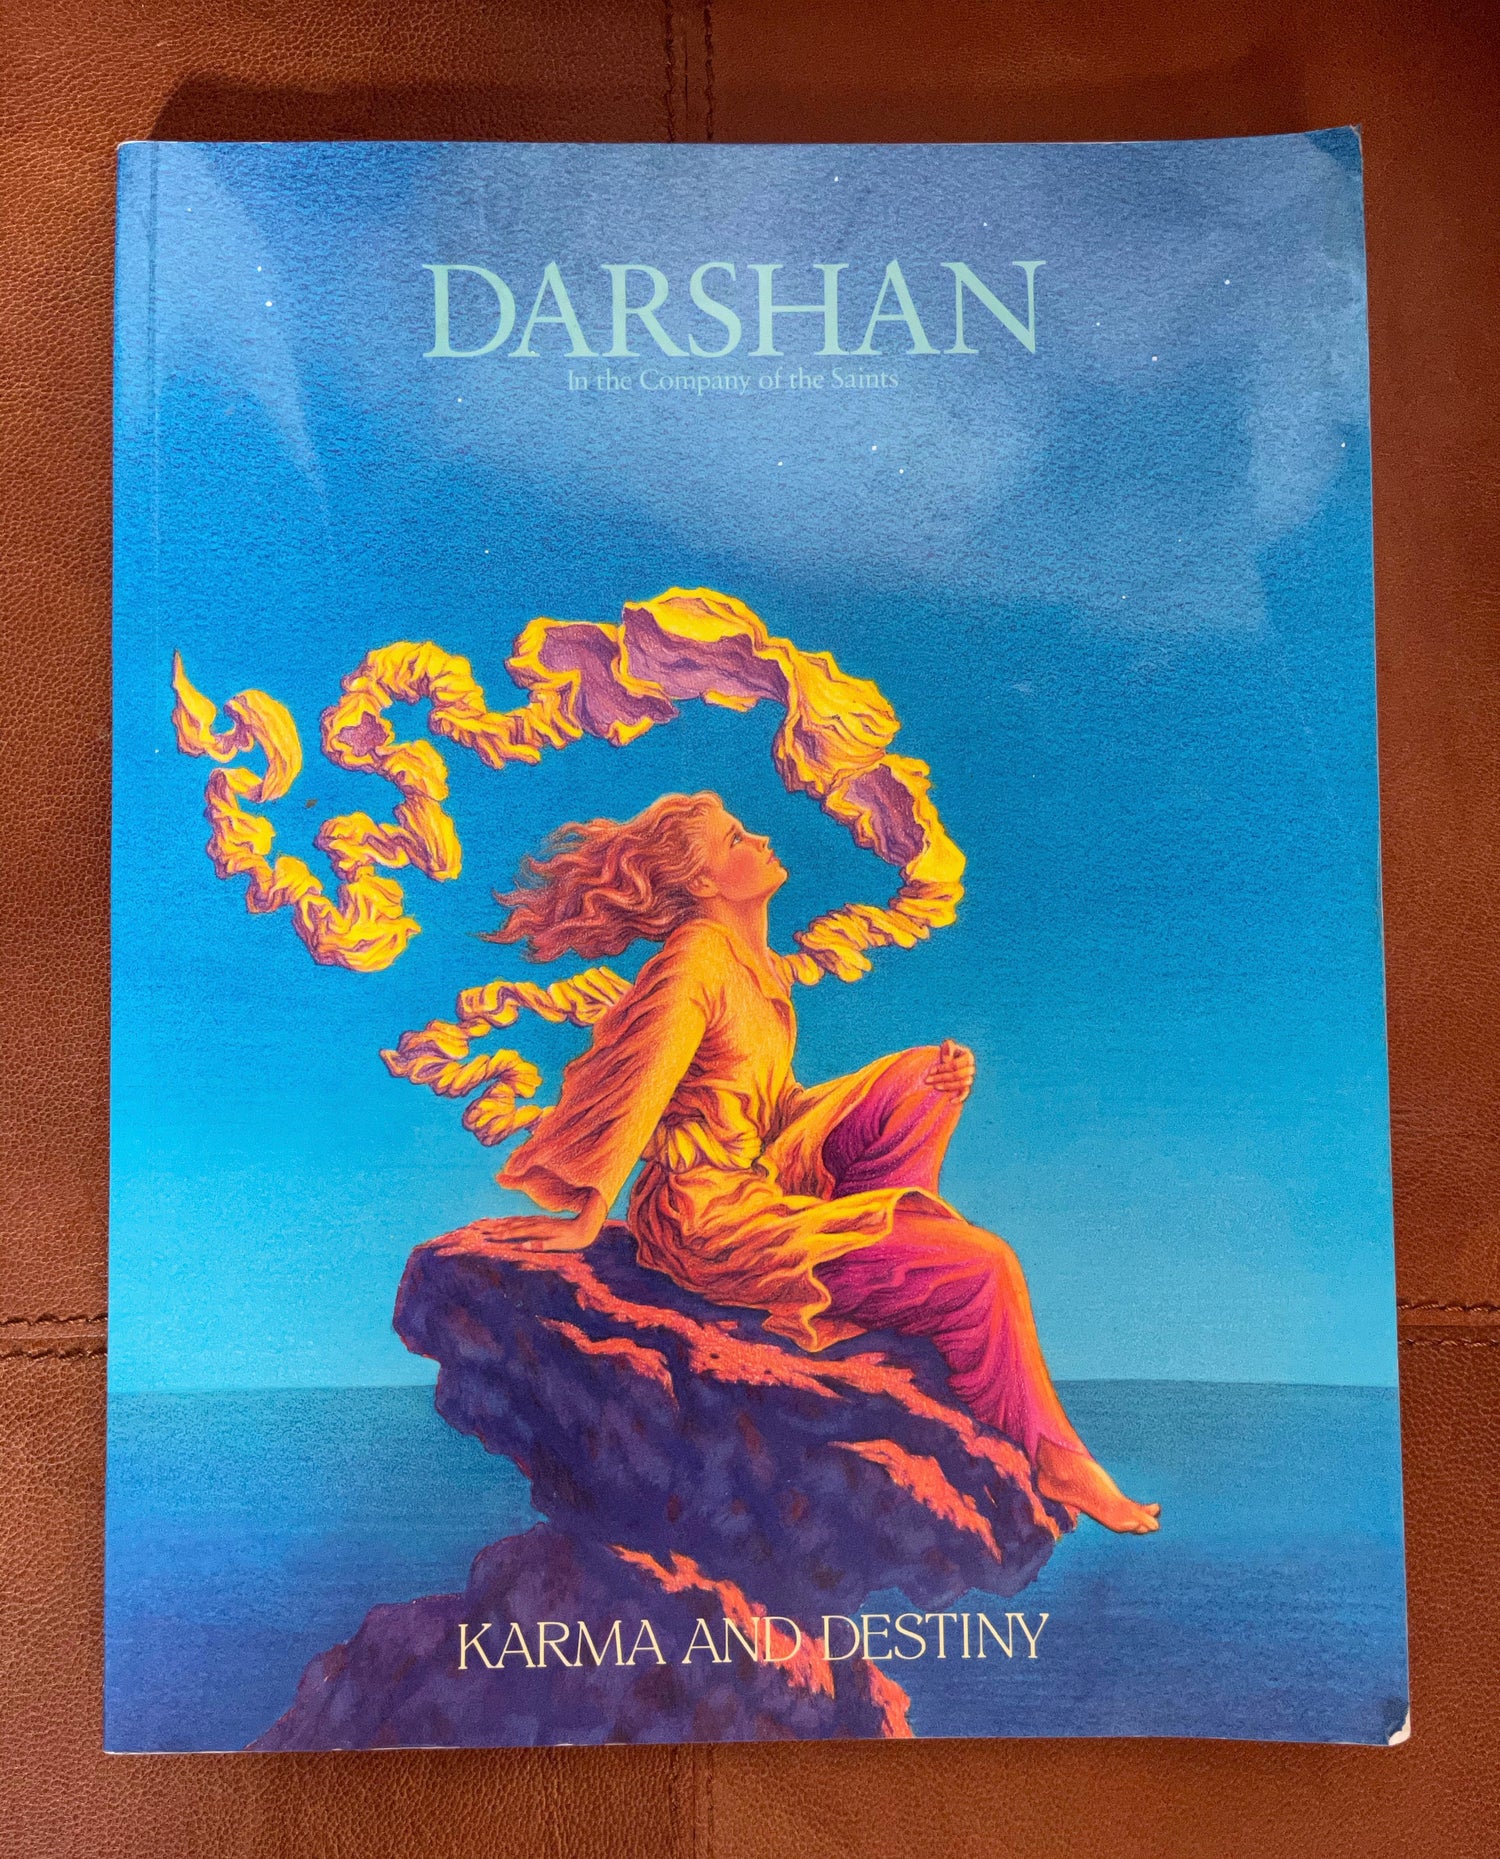 Darshan Magazine, In The Company of The Saints, Karma and Destiny